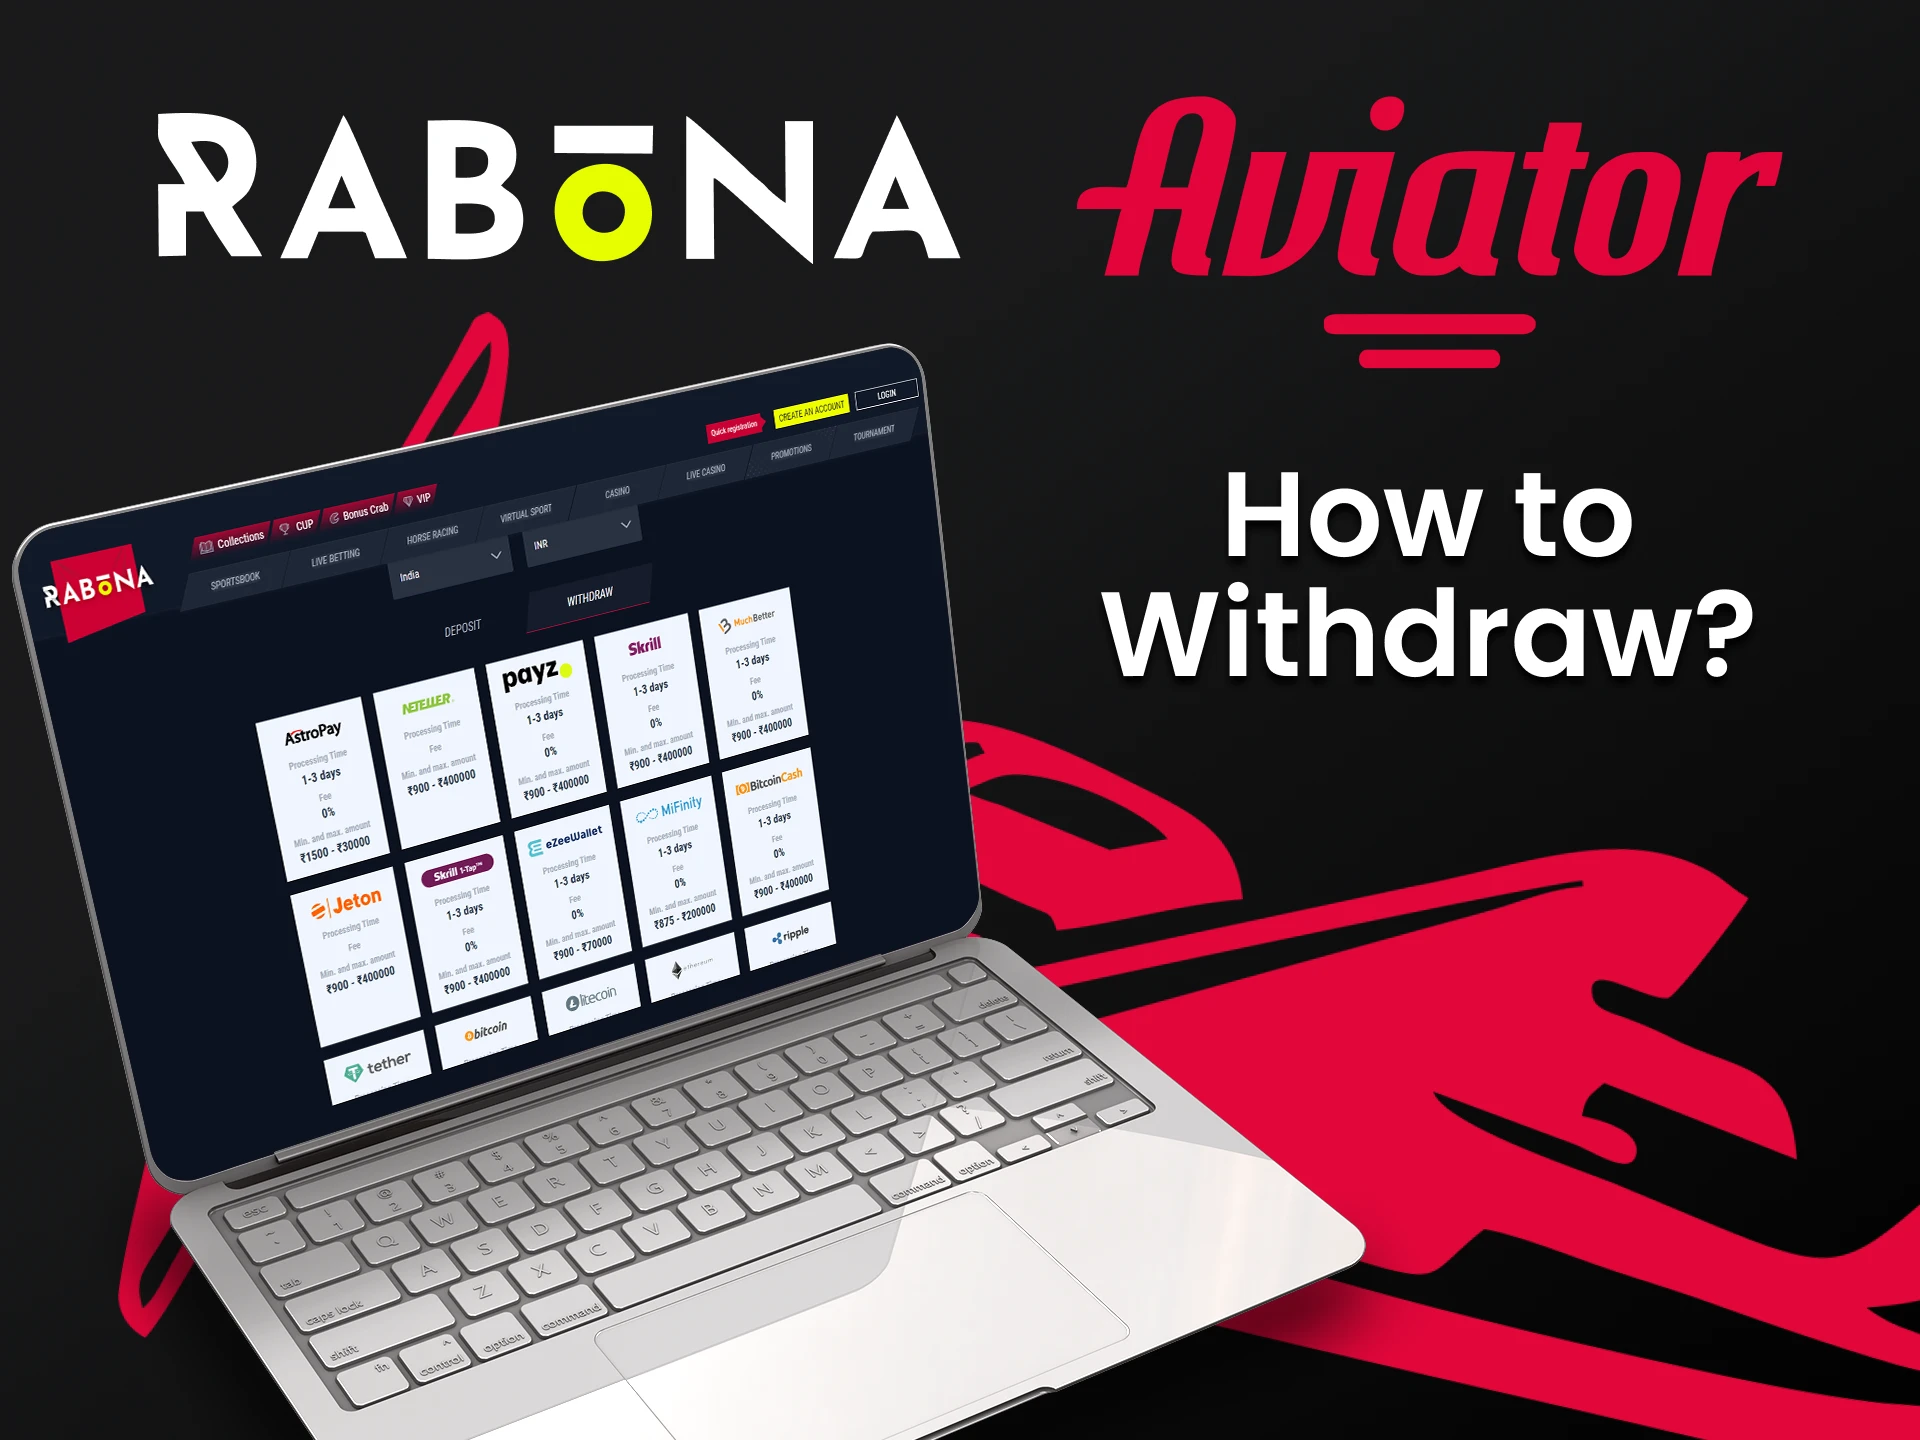 Choose a convenient way to withdraw funds from Rabona.